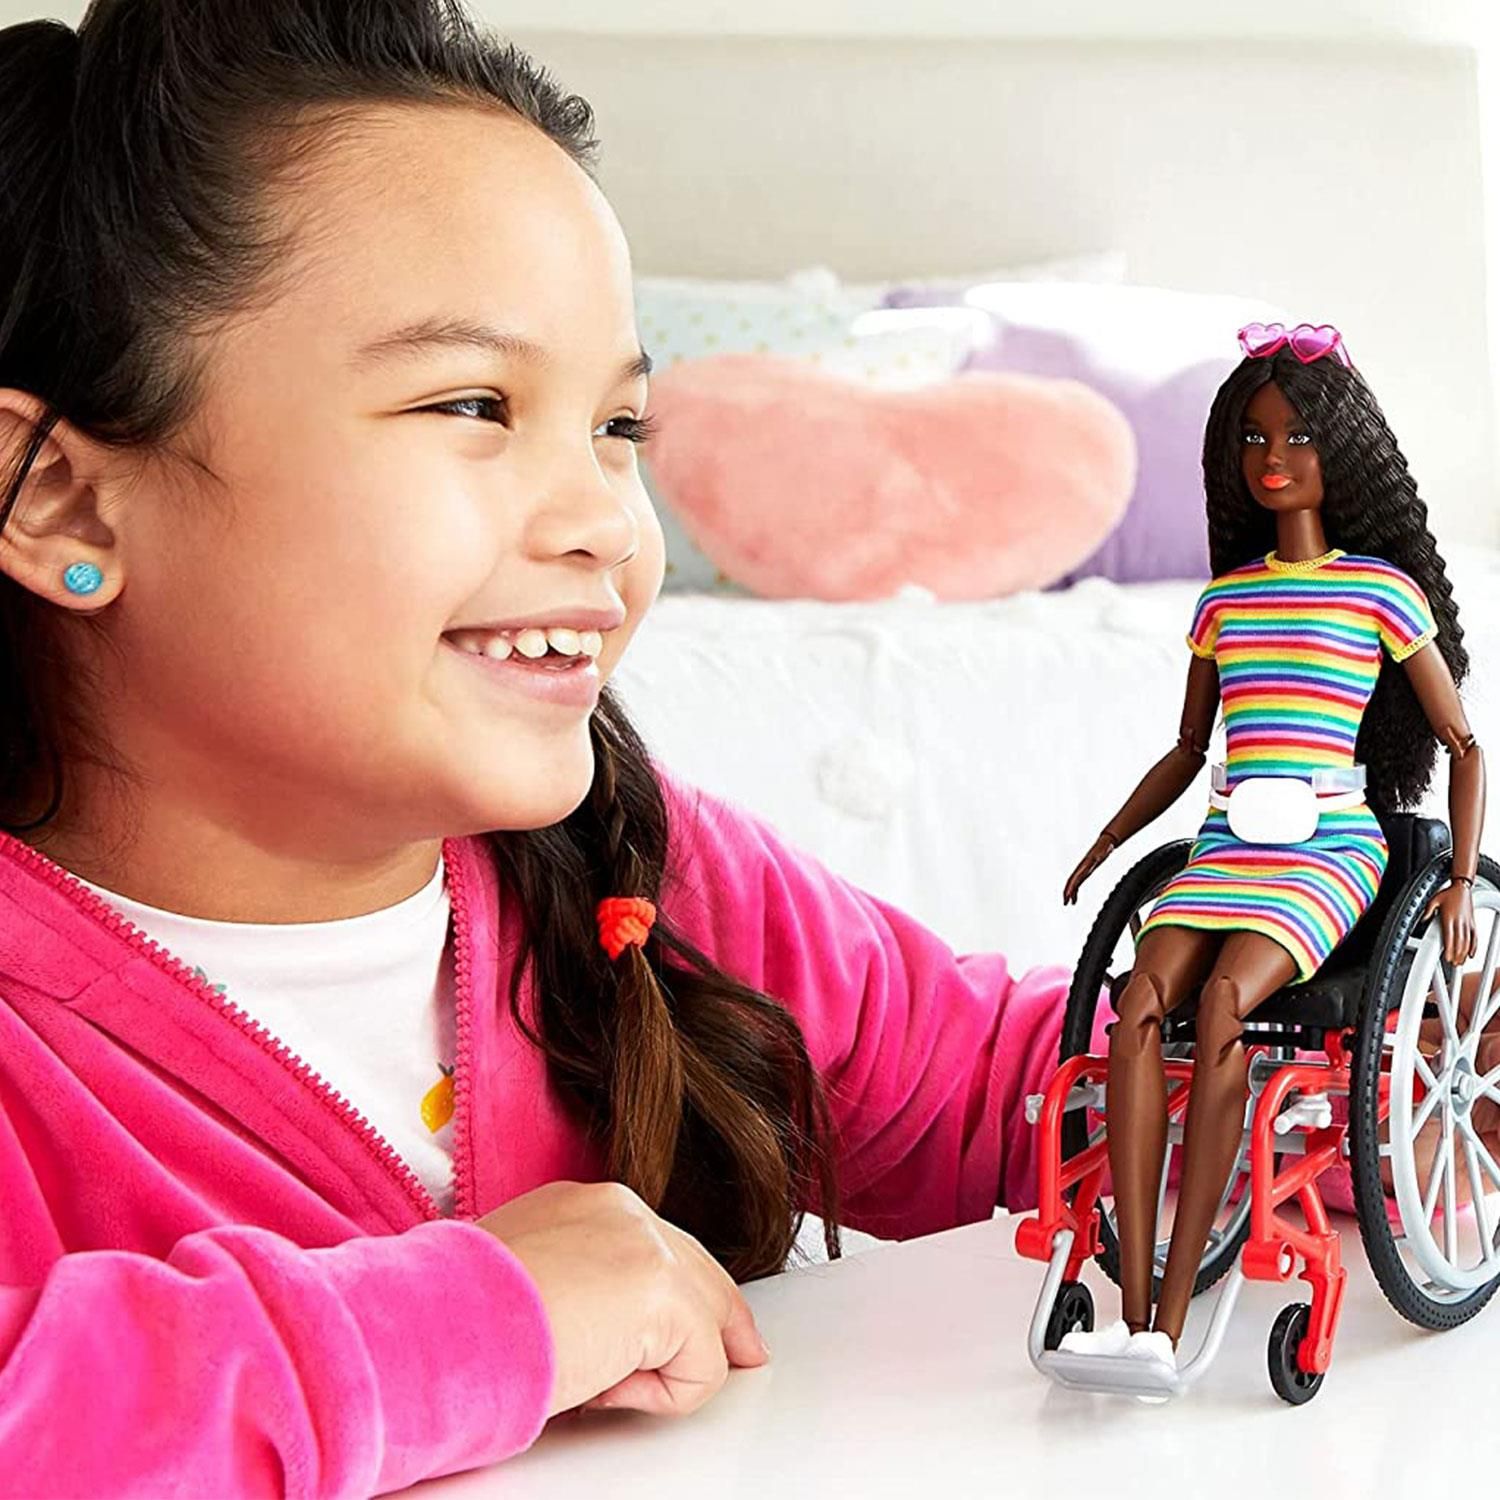 Barbie Fashionistas Doll with Wheelchair and Ramp, Great Toy For Children

Barbie and Ken Fashionistas celebrate diversity with fashion dolls that encourage real-world storytelling and open-ended dreams! With a wide variety of skin tones, eye colours, hair colours and textures, body types and fashions, the dolls are designed to reflect the world kids see today. Barbie doll inspires new play possibilities with a manual wheelchair and ramp so she can easily get in and out of the Barbie Dreamhouse (sold separately, subject to availability). Kids can collect them for infinite ways to play out stories, express their own style and discover that fashion is fun for everyone! Includes doll-wearing fashions and accessories. Each is sold separately, subject to availability. Barbie dolls cannot stand alone. Flat shoes fit dolls with articulated ankles or flat feet. Colours and decorations may vary.

Features:

​The latest line of BarbieFashionistas dolls includes different body types and a mix of skin tones, eye colours, hair colours, hairstyles and so many fashions inspired by the latest trends!
​Barbiedoll comes with a wheelchair that has rolling wheels and a working brake, plus a ramp that works with the BarbieDreamhouse (sold separately).
​The doll also features 22 